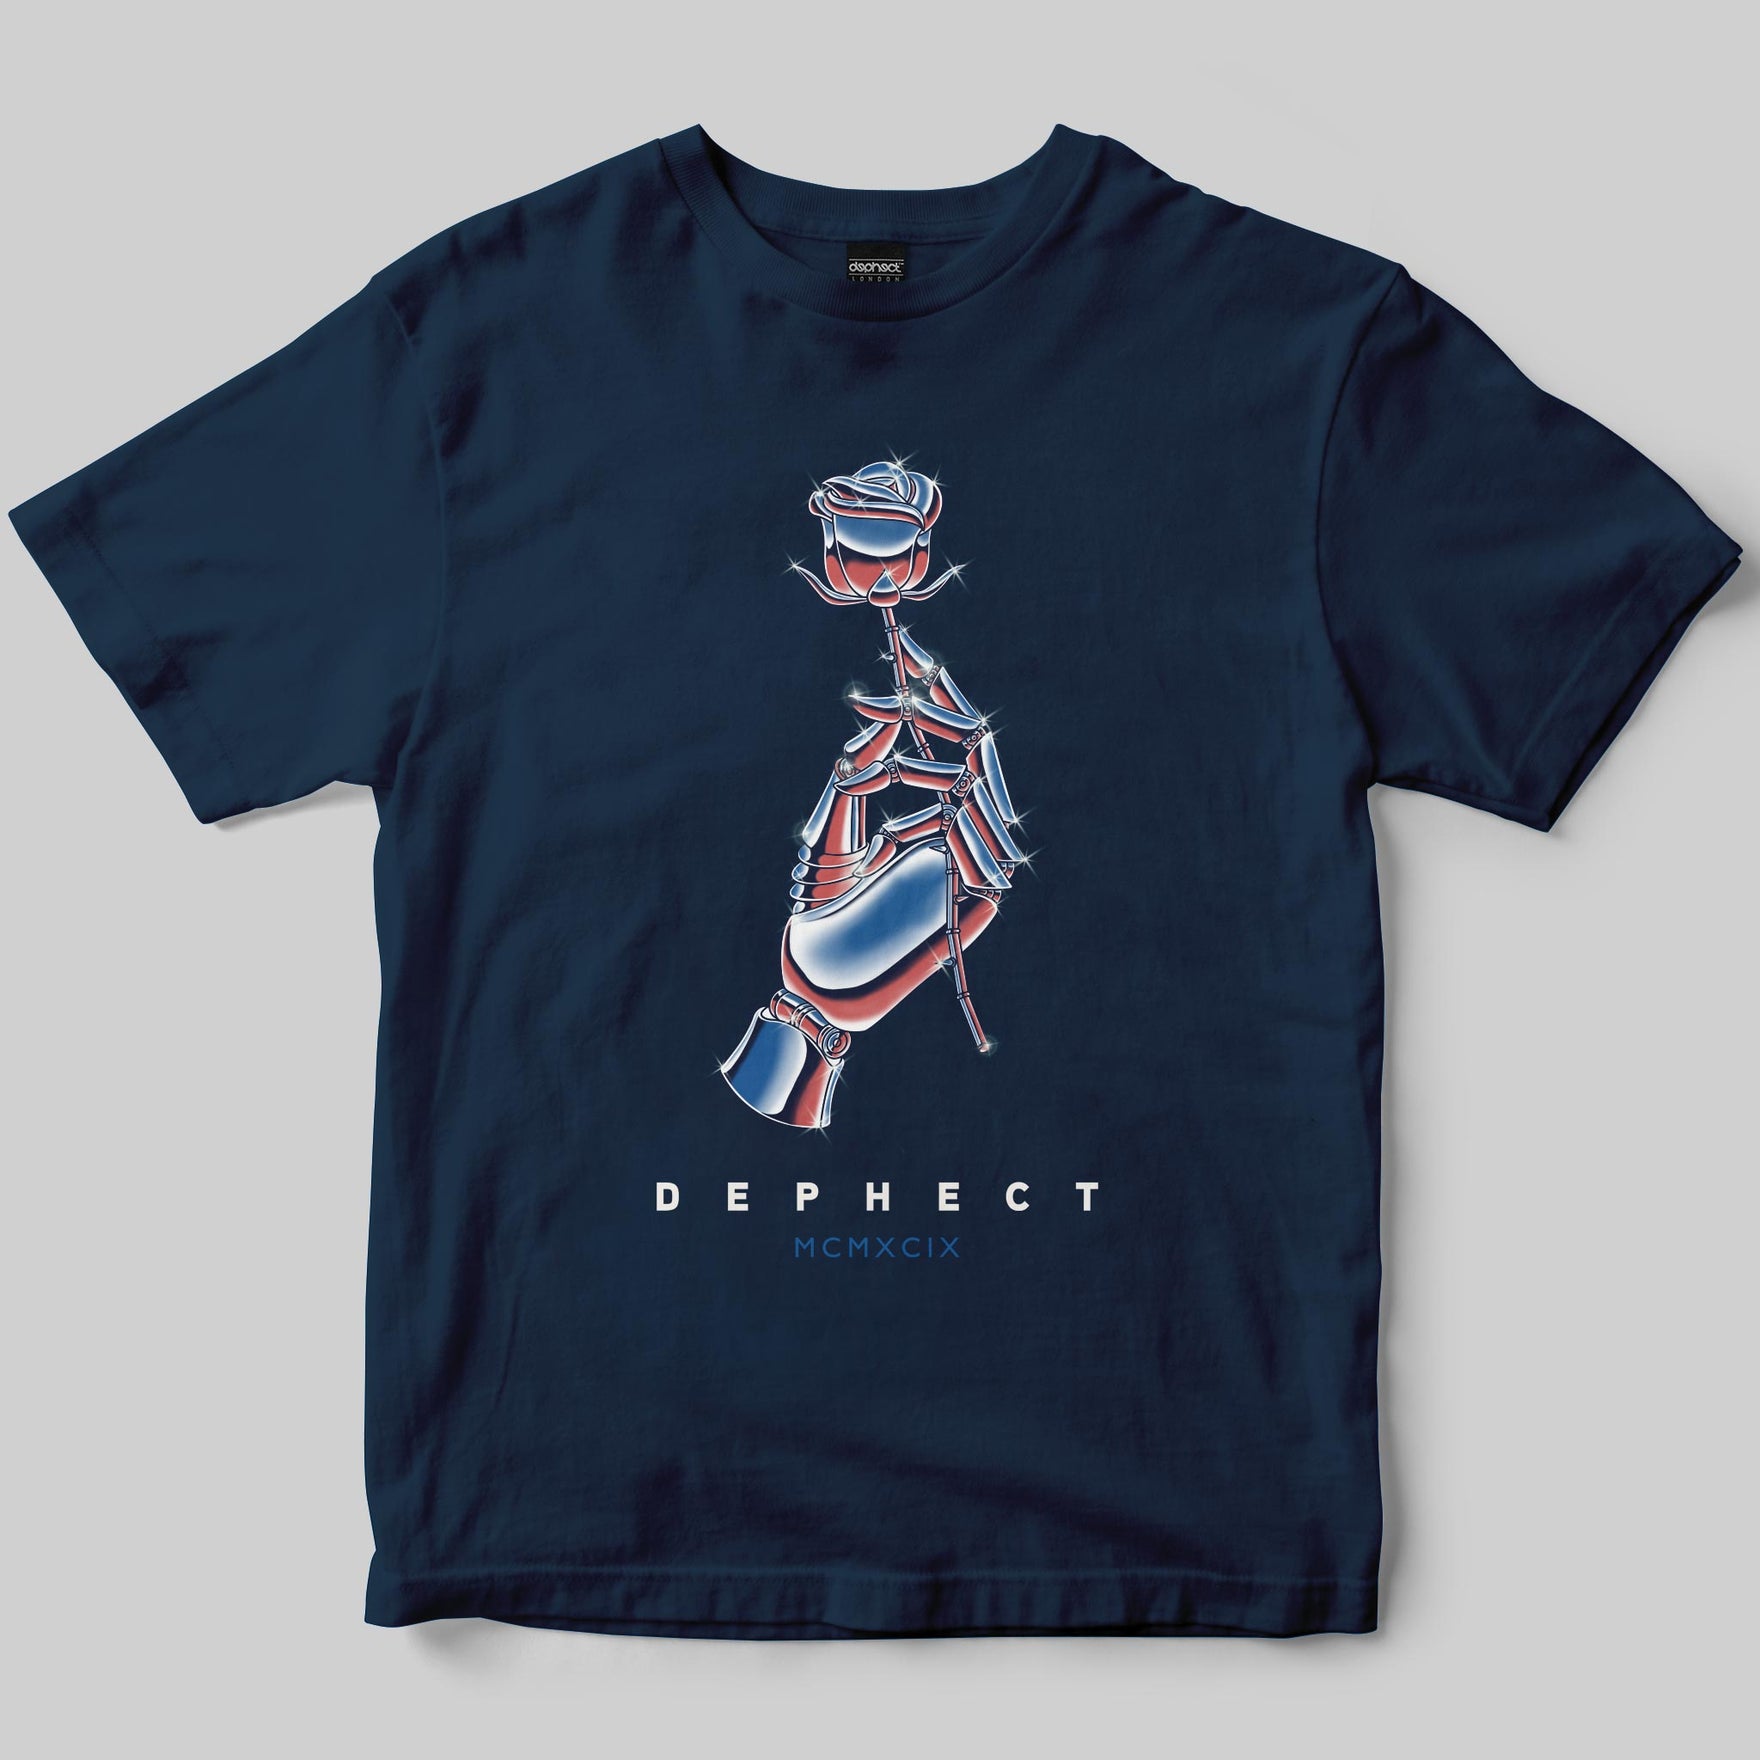 Rose T-Shirt / Navy / by Heeey!